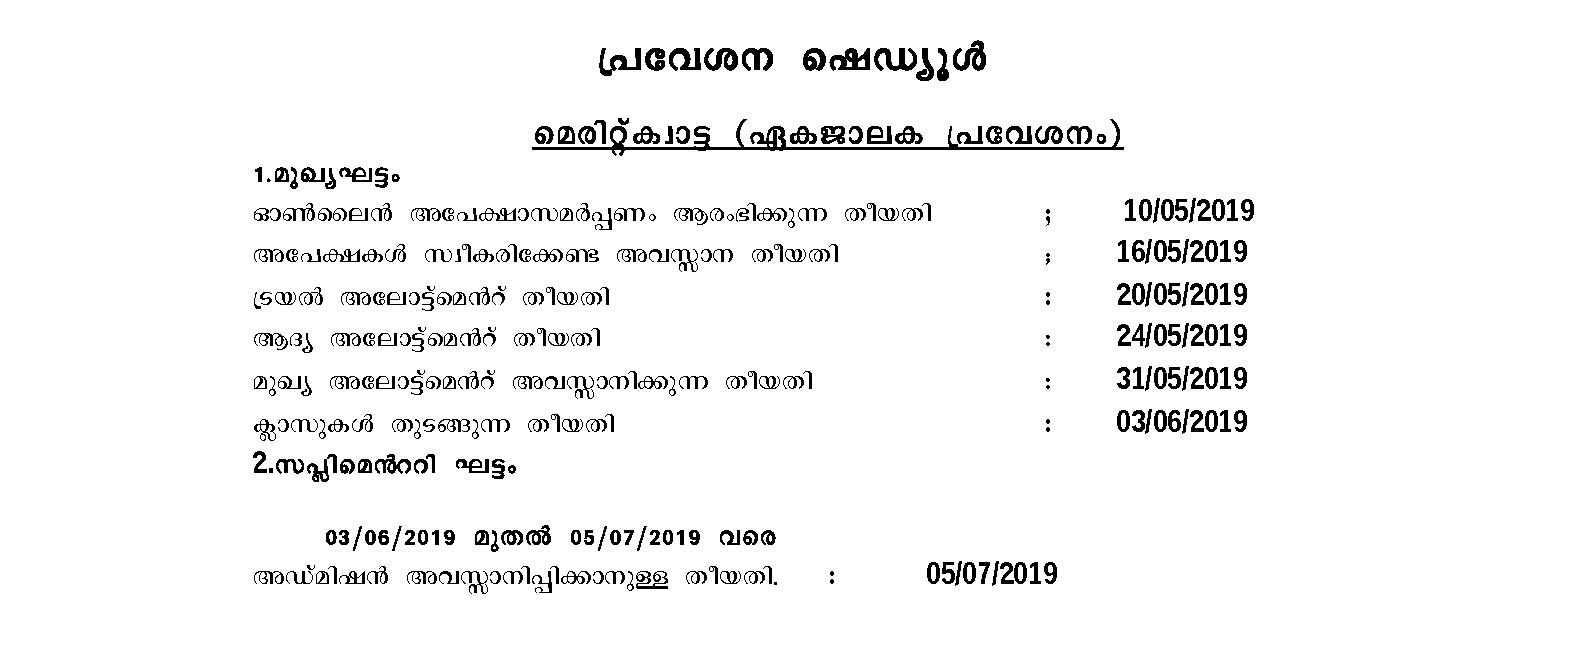 Plus 1 Seat Availability in Schools of Kerala for 2018 2019 Batch - Notification Image 8